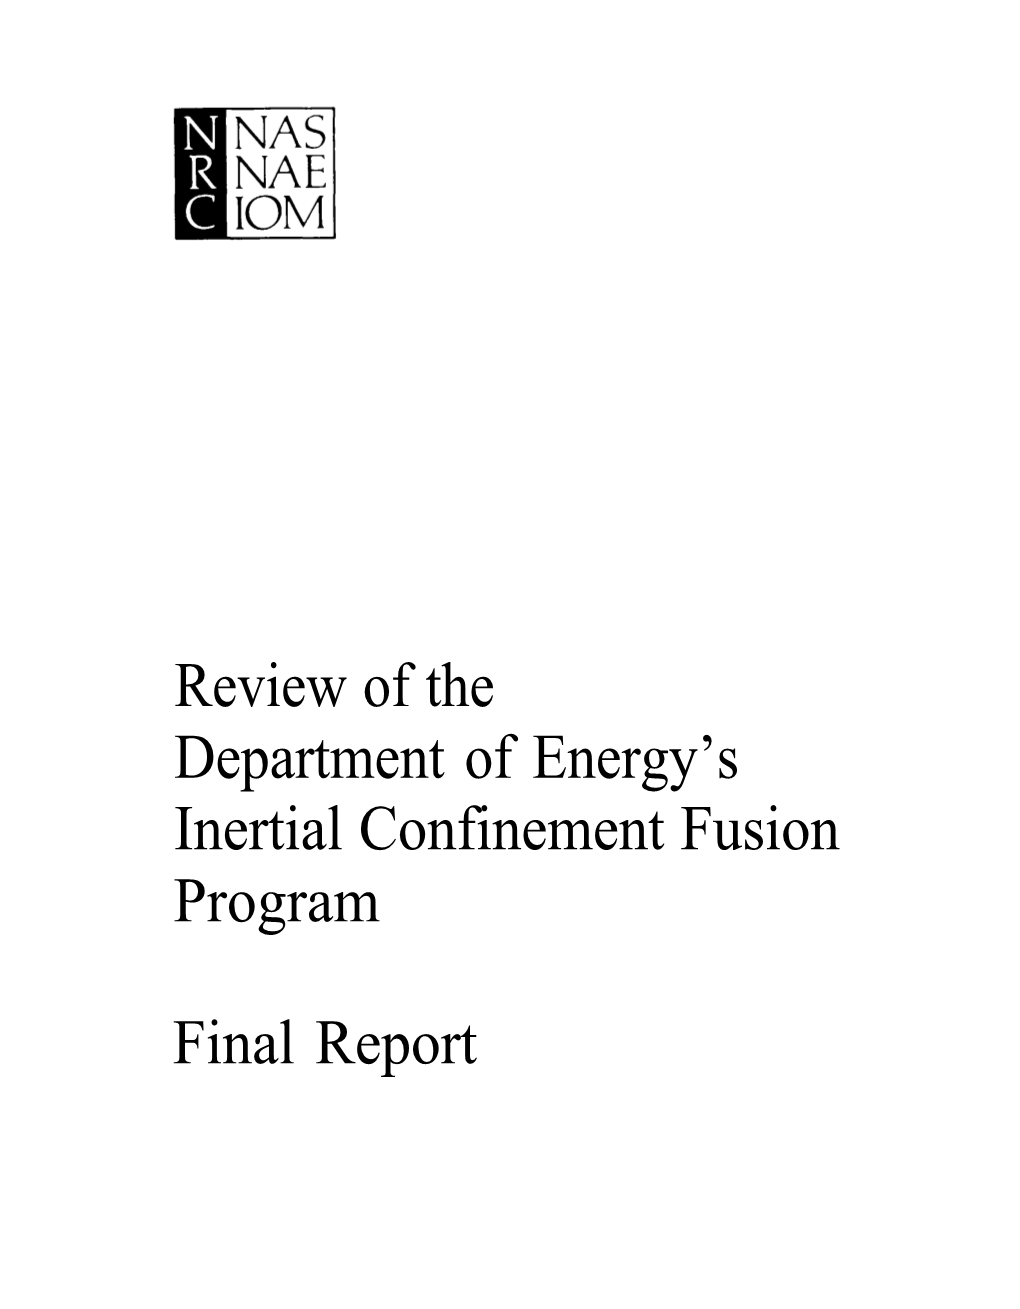 Review of the Department of Energy's Inertial Confinement Fusion